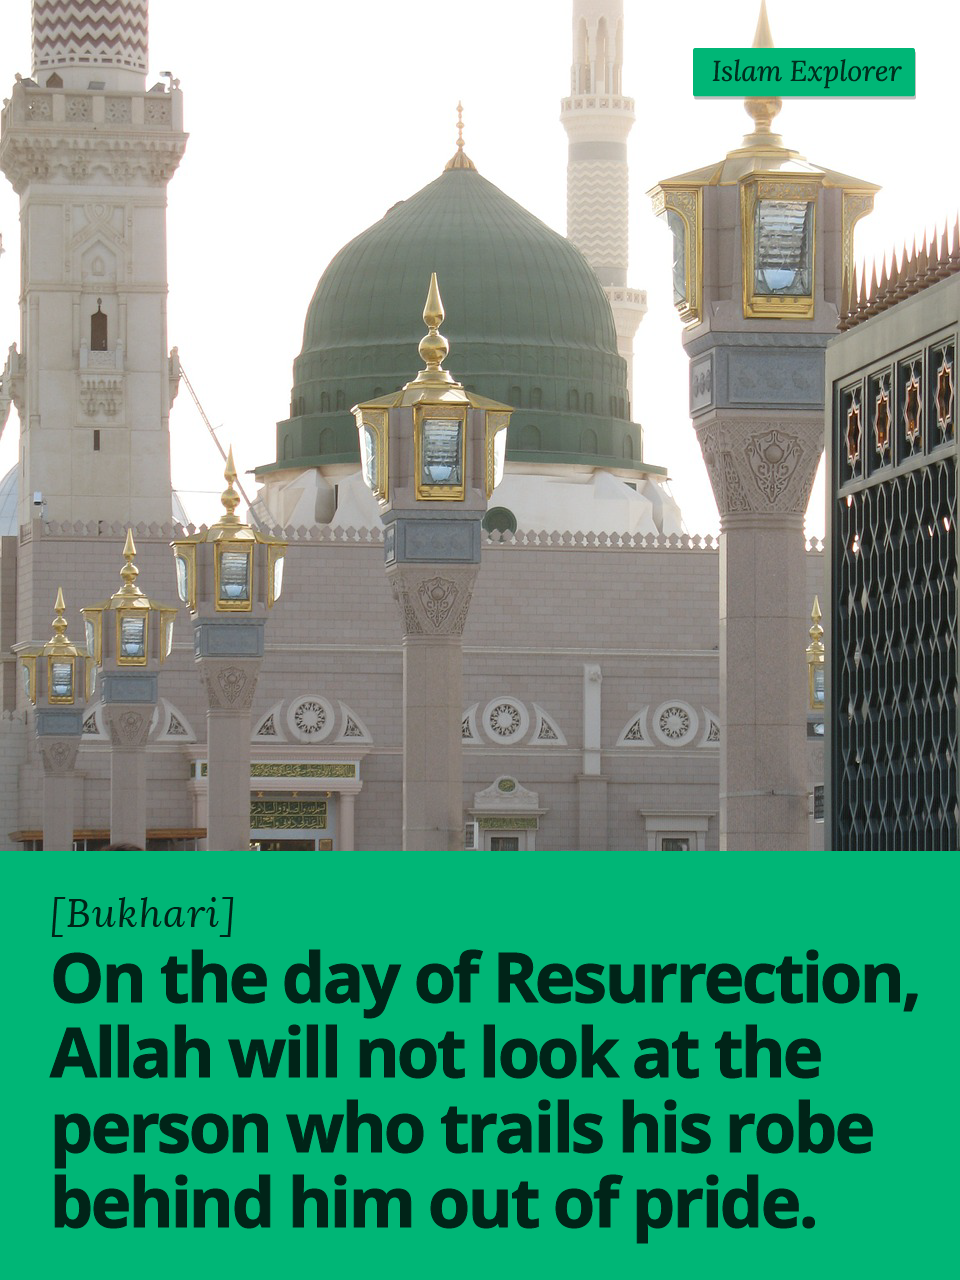 On the day of Resurrection